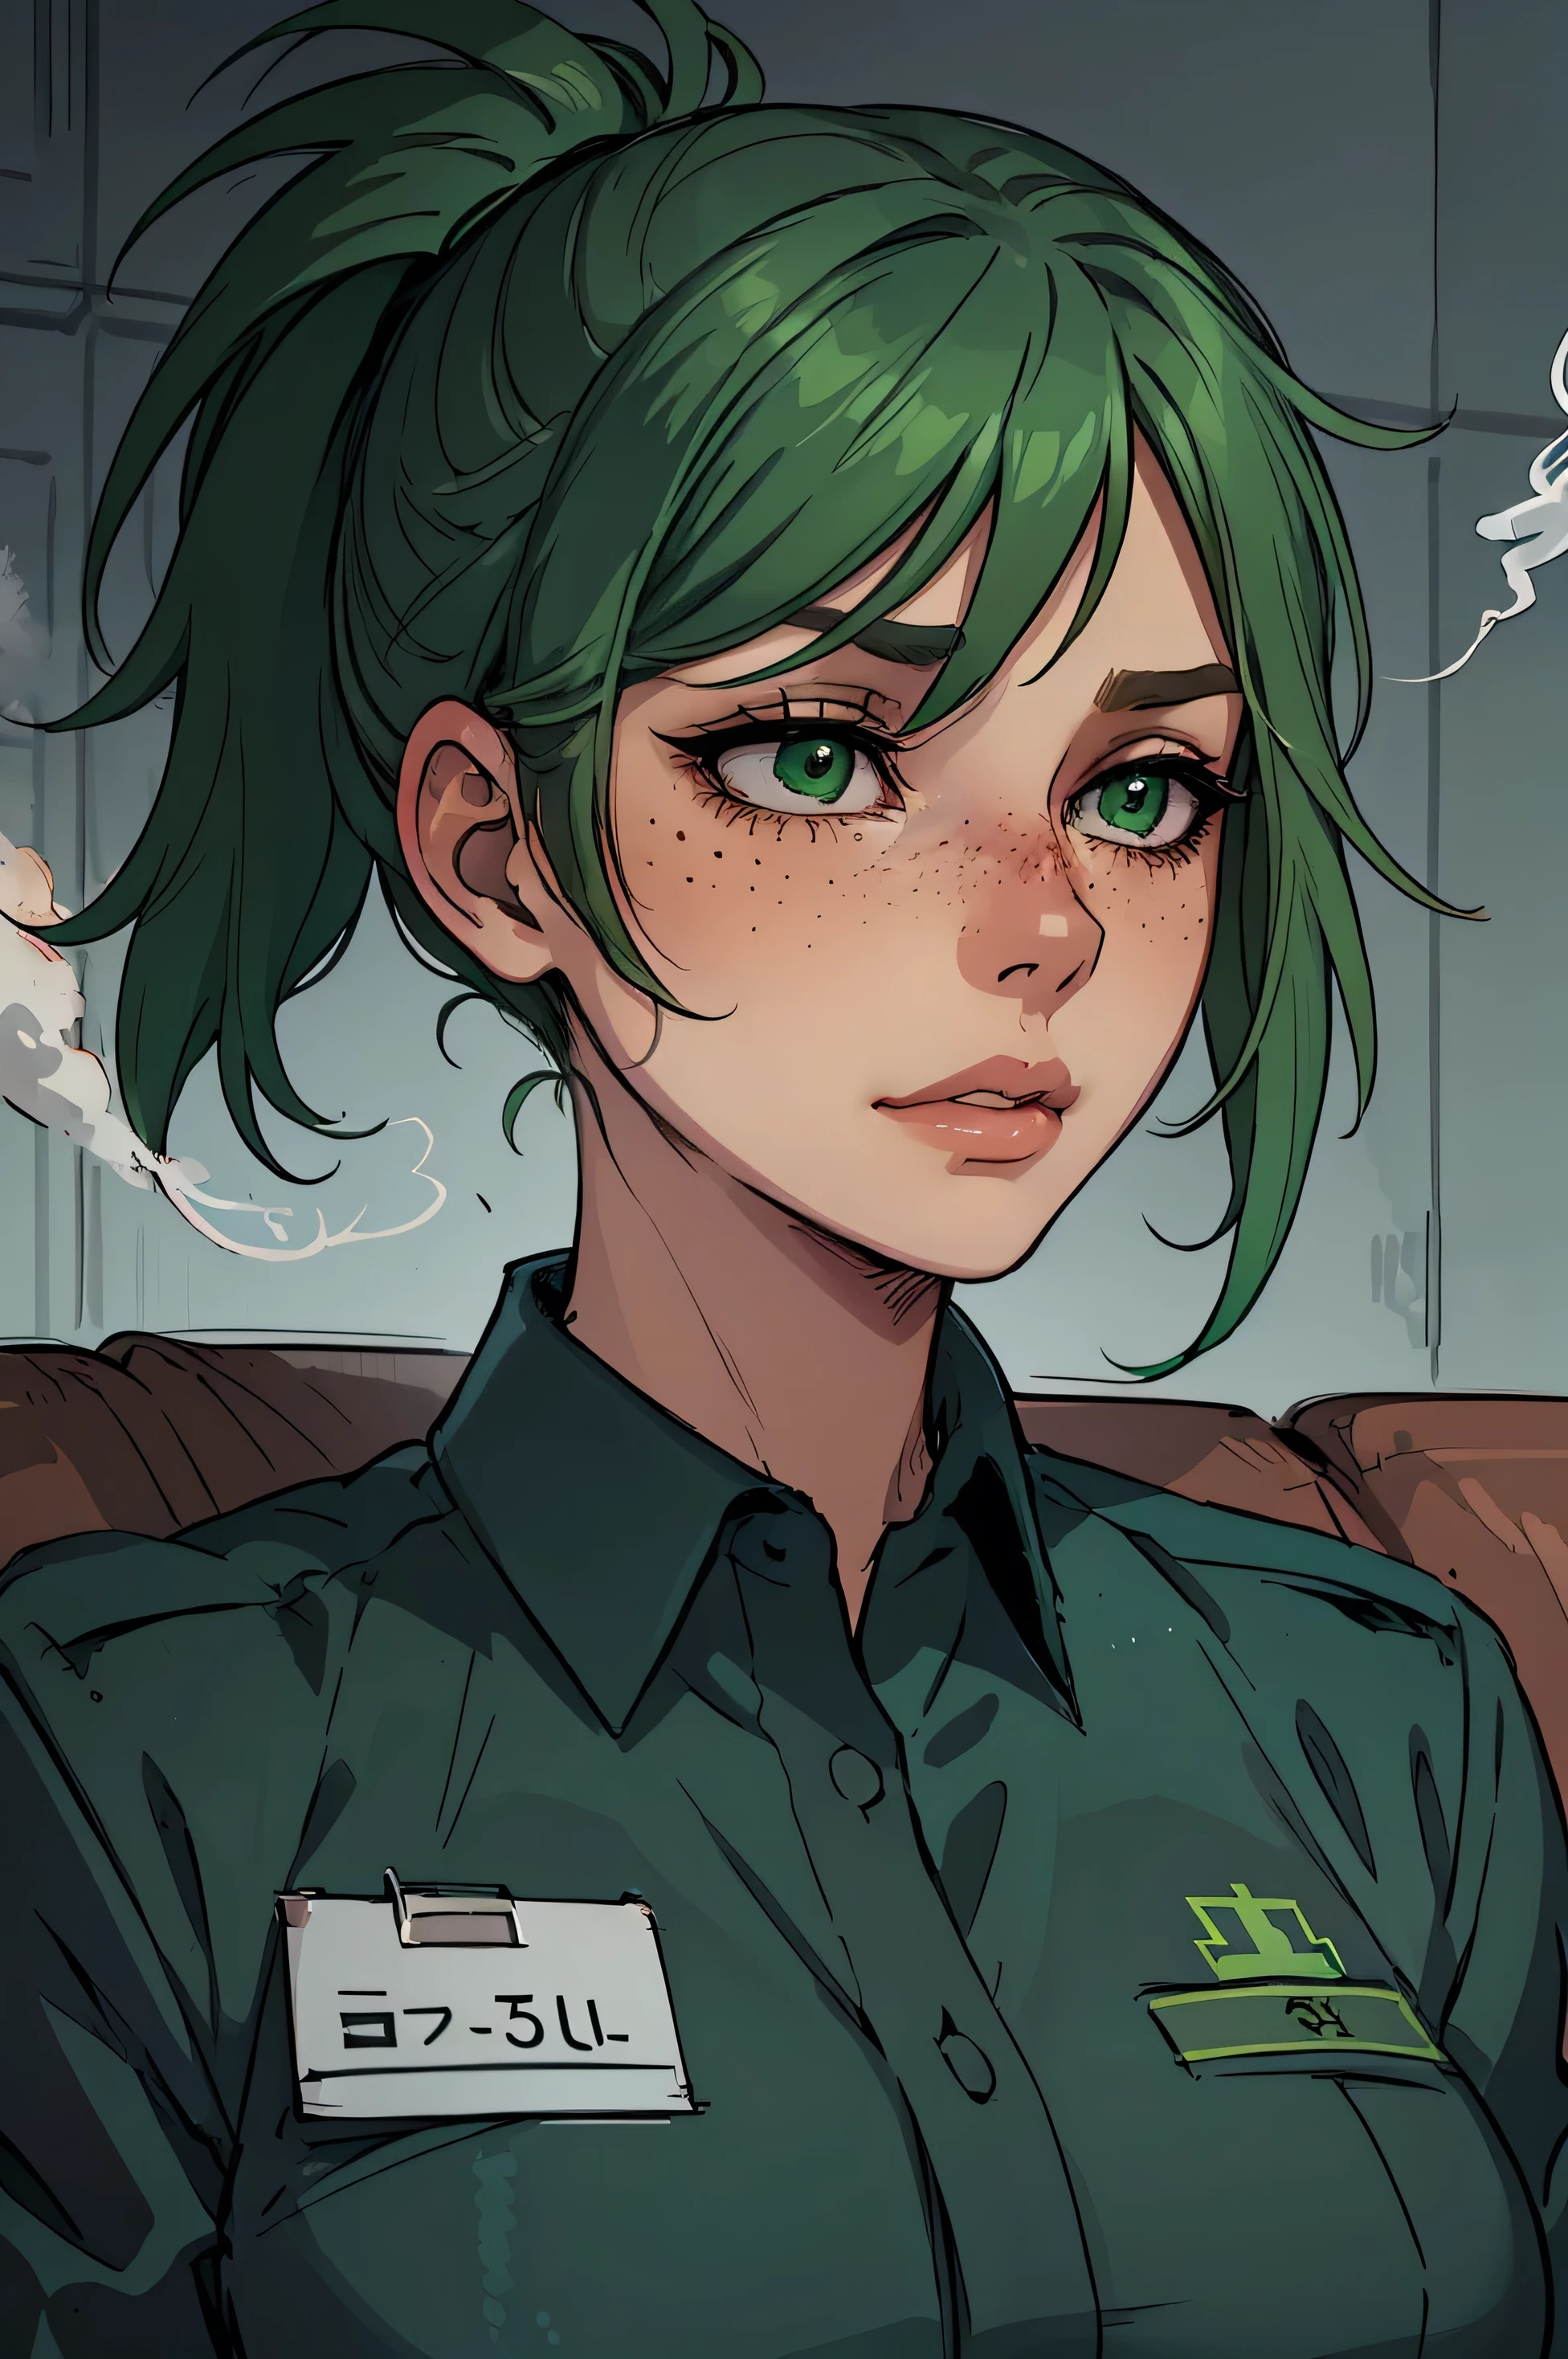 Masterpiece, best quality, centered in frame, portrait, female, tan skin, stressed expression, busty, exhaling smoke, eye bags, emt gear, name tag, nervous, full lips, messy ponytail, bright green hair, couch landscape, green eyes, paramedic uniform, freckles, beautiful